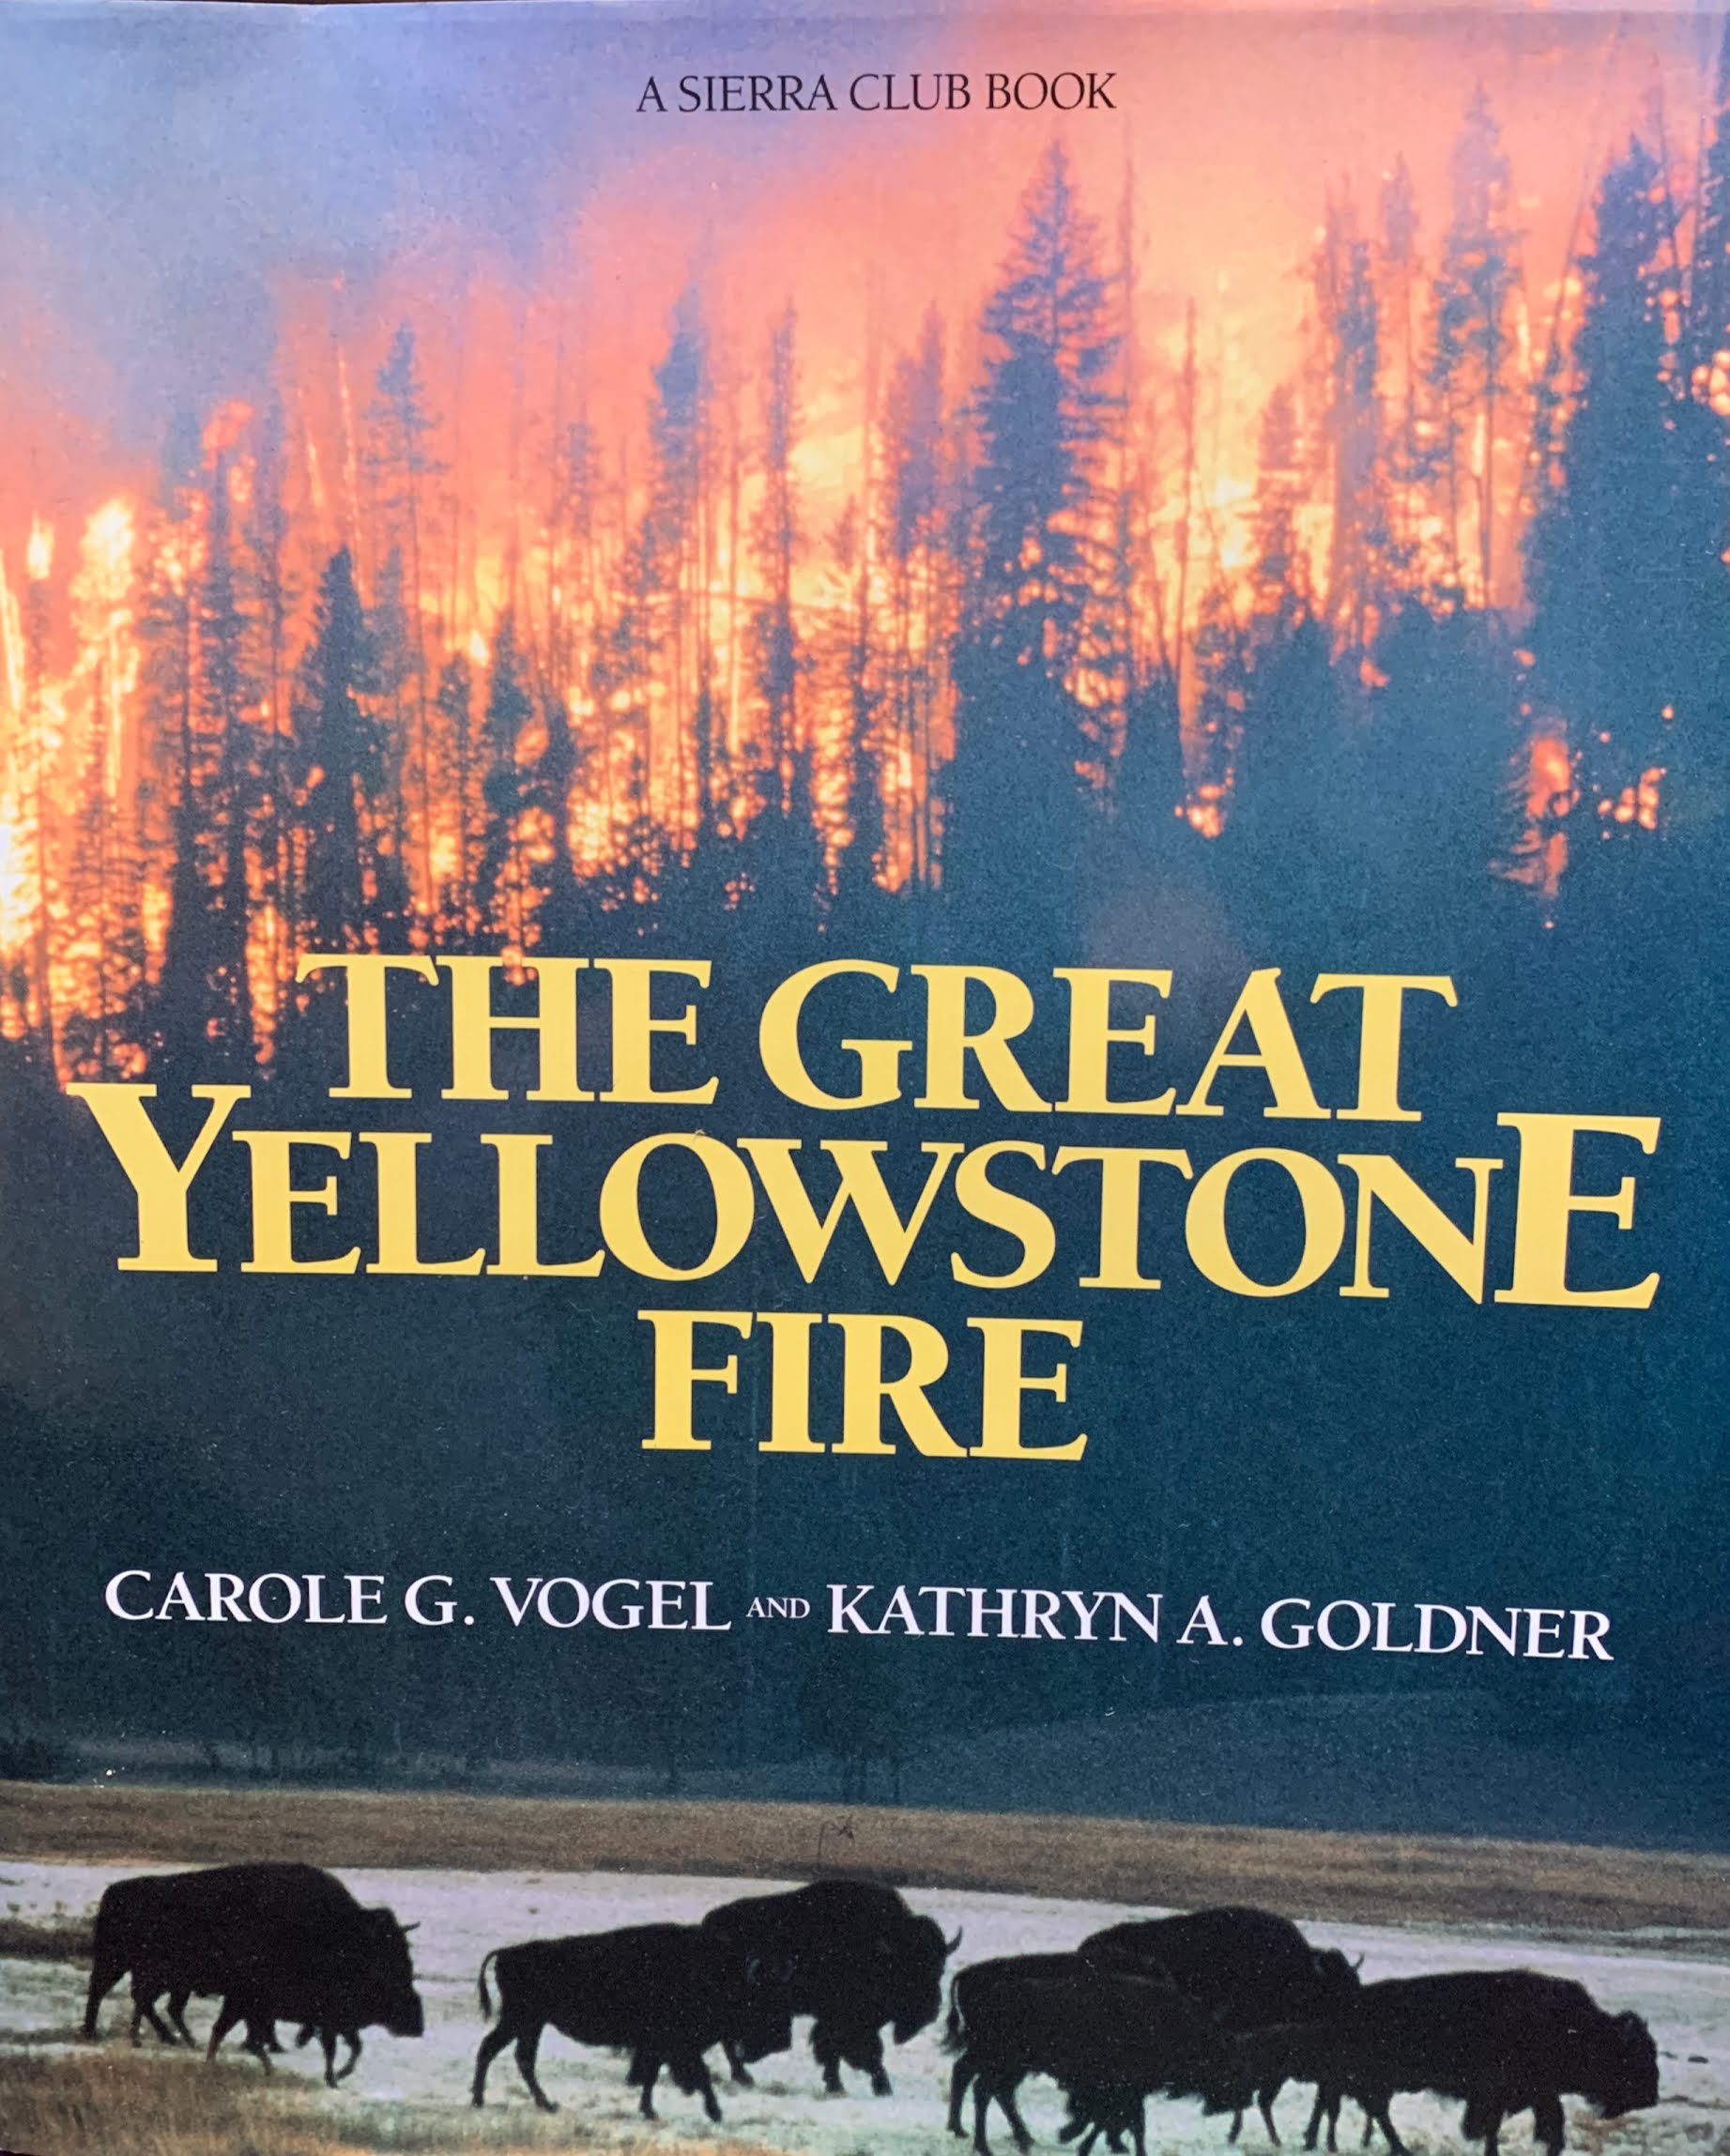 The Great Yellowstone Fire